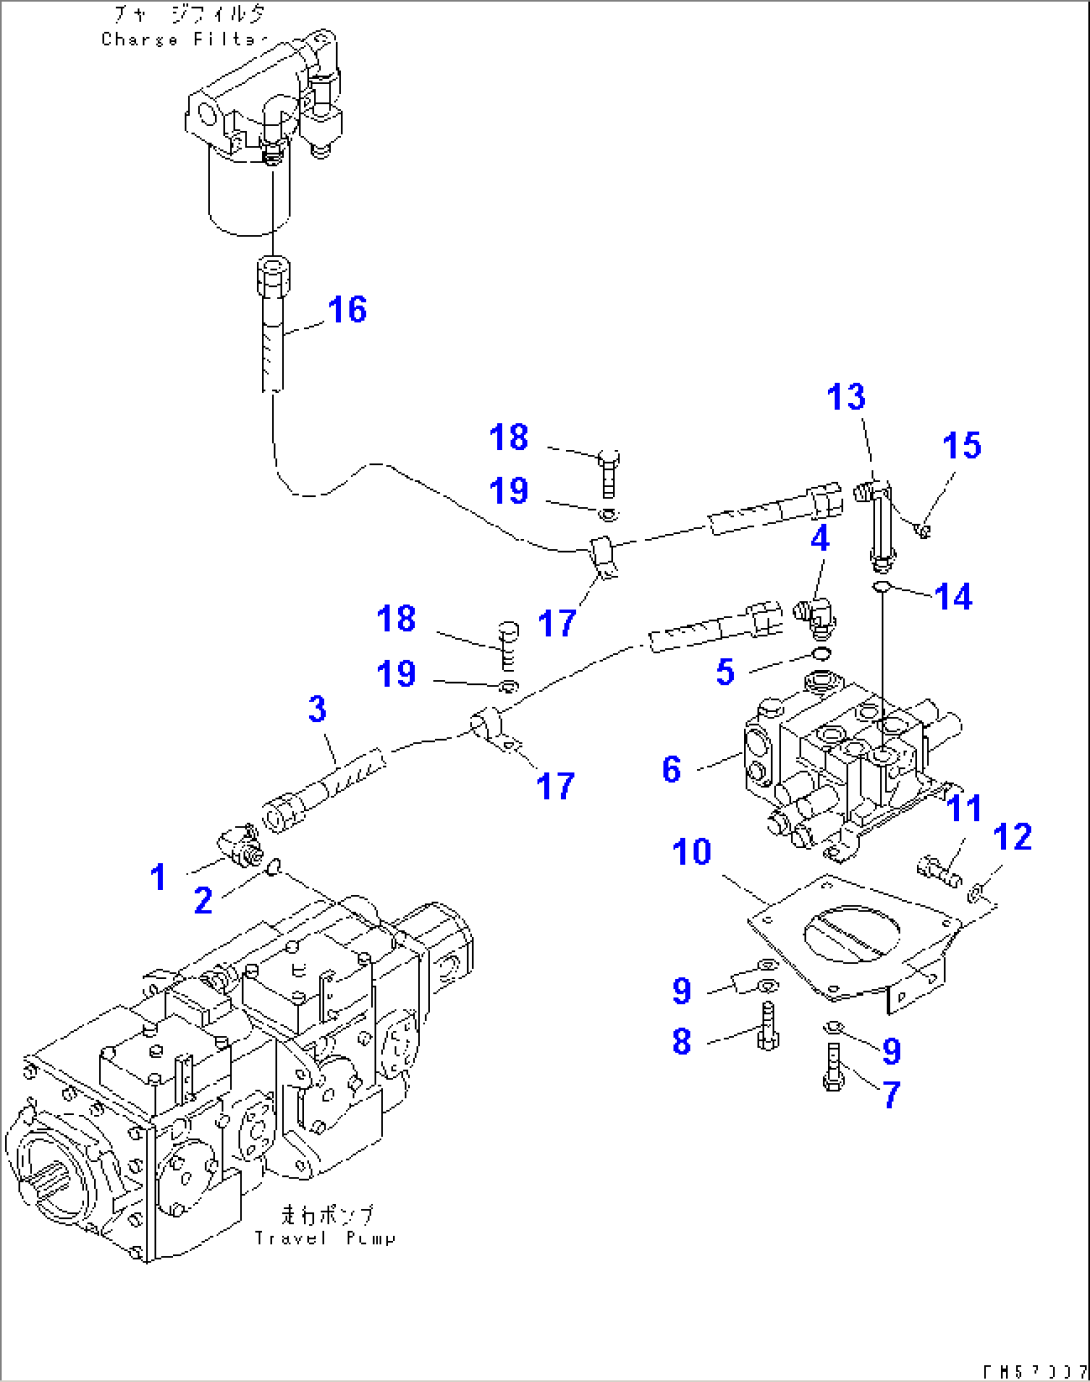 HYDRAULIC PIPING (REAR CONTROL VALVE LINE) (1/3) (PUMP TO CONTROL VALVE)